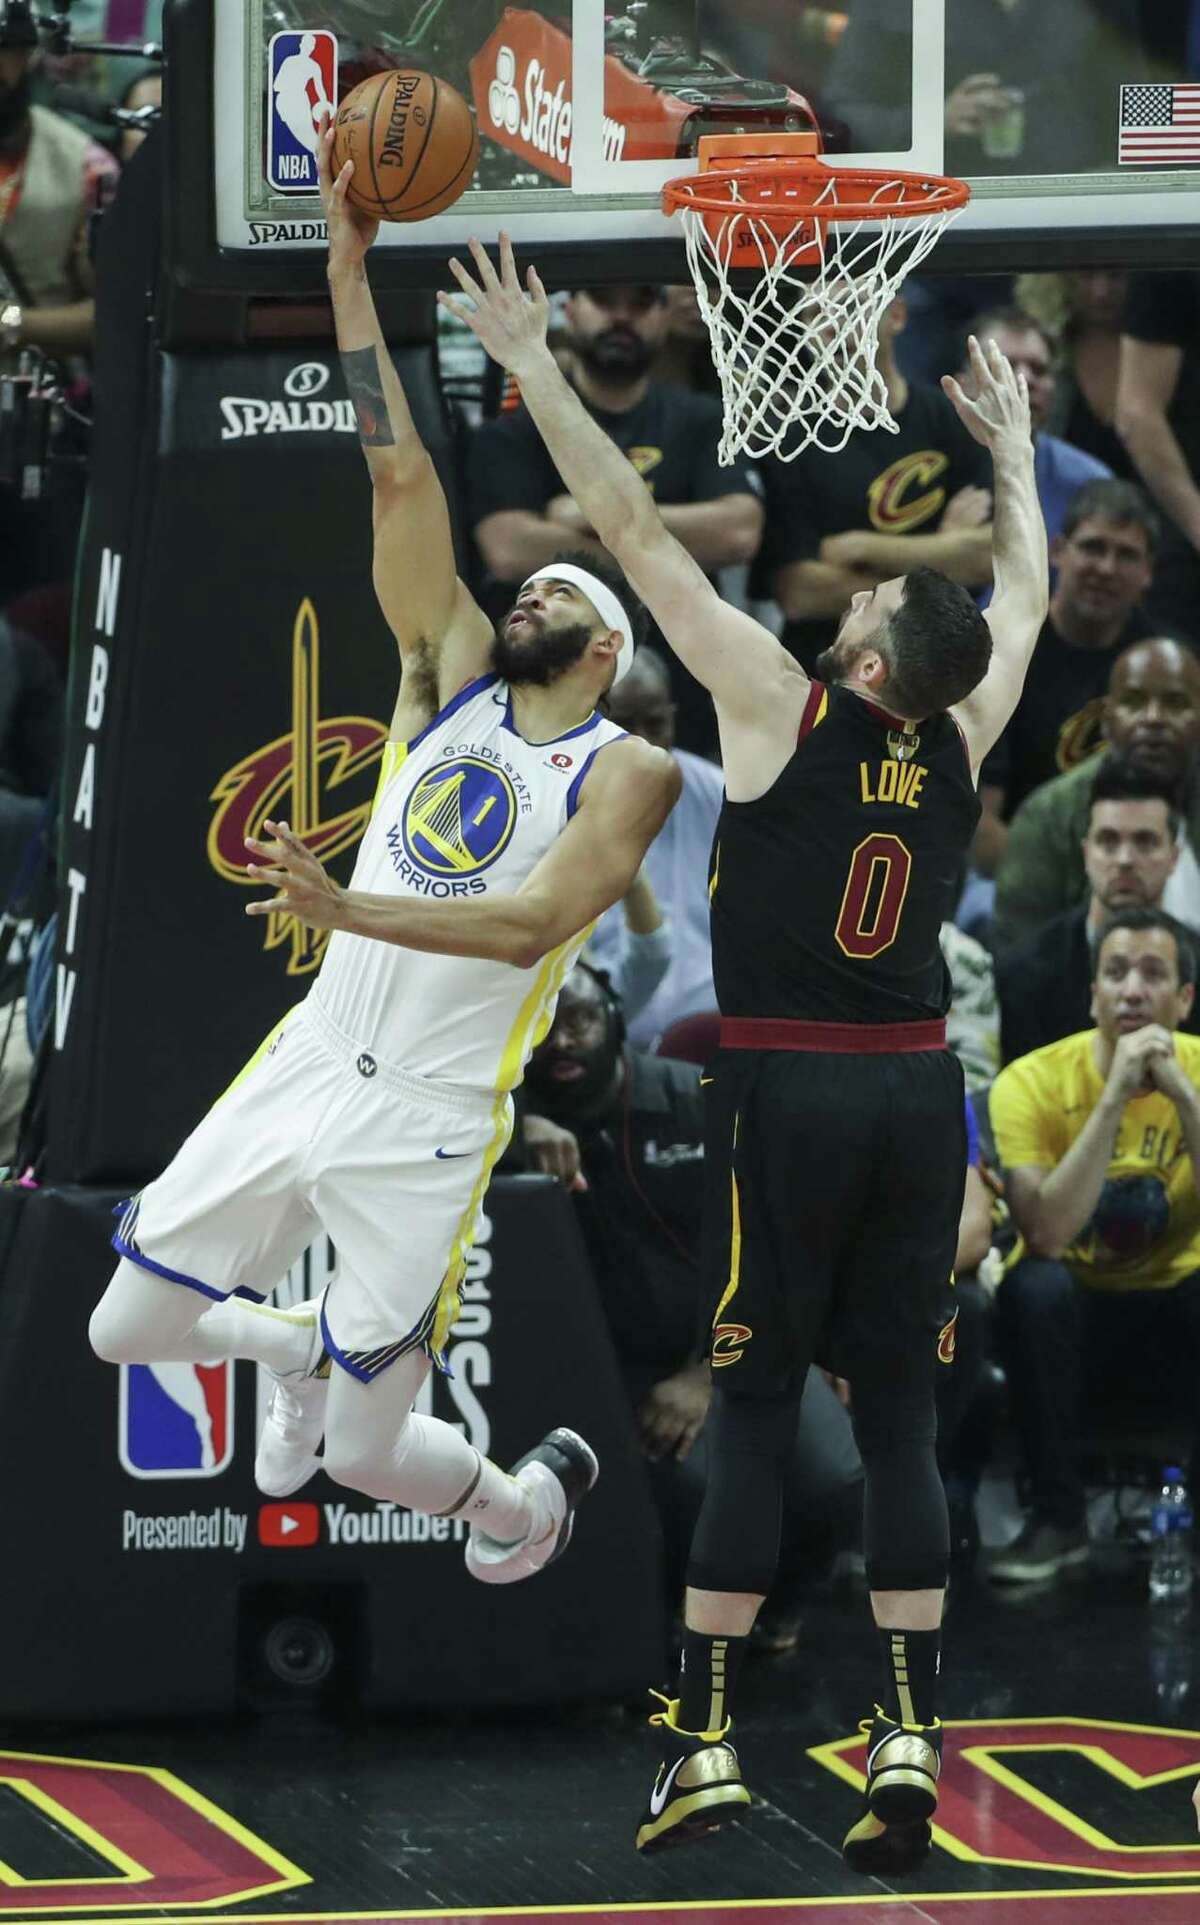 Golden State Warriors' JaVale McGee goes up for a reverse layup agaisnt Cleveland Cavaliers' Kevin Love in the first quarter during game 4 of The NBA Finals between the Golden State Warriors and the Cleveland Cavaliers at Oracle Arena on Friday, June 8, 2018 in Cleveland, Ohio.